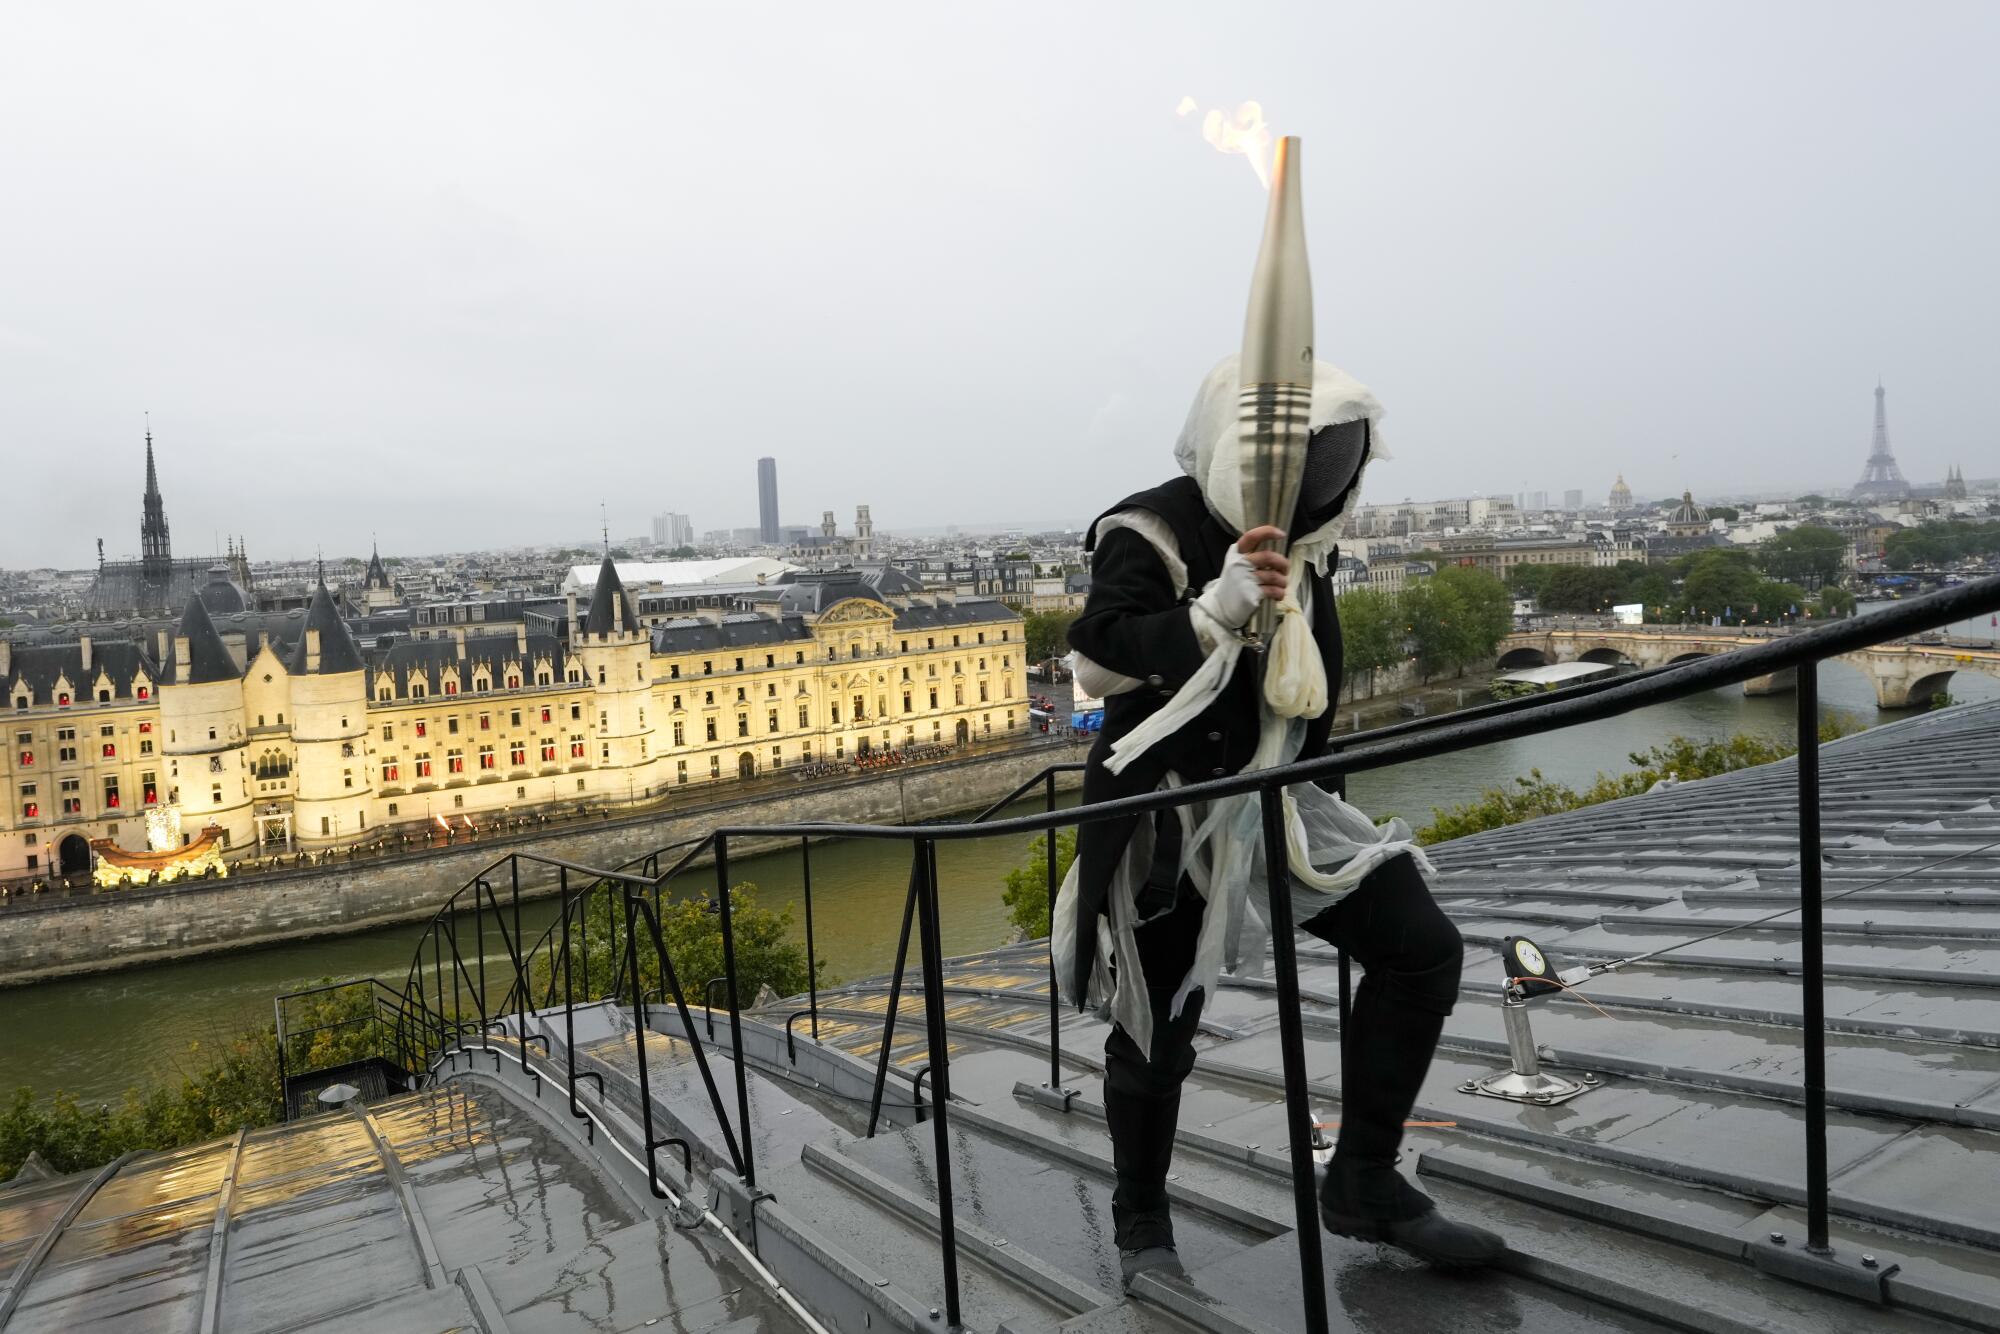 A torchbearer carries the Olympic flame over a building along the Seine River.